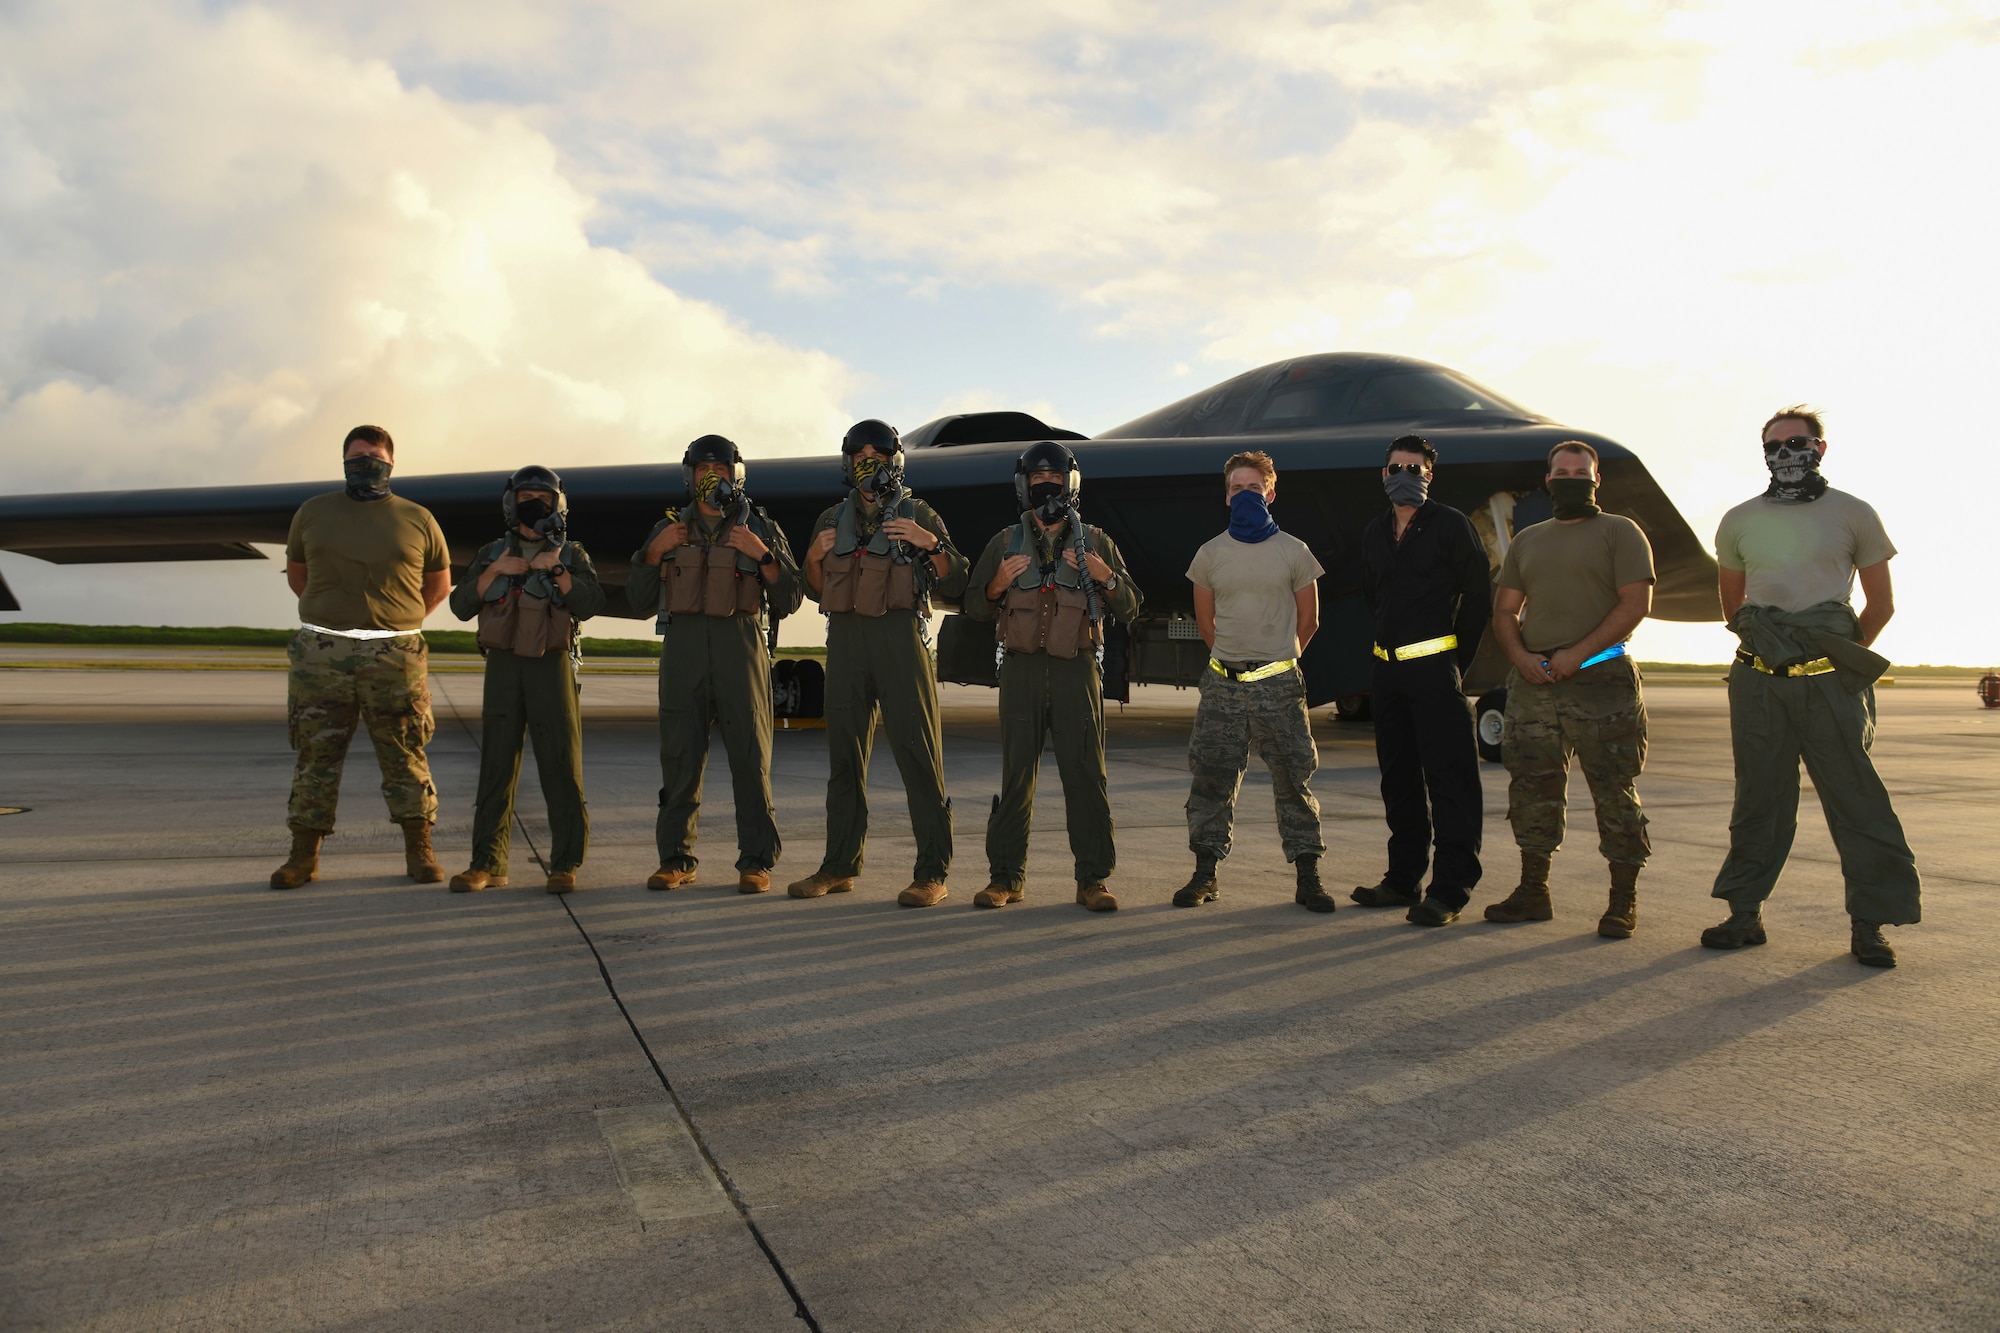 U.S. Air Force B-2 Spirit Stealth Bomber pilots and maintainers assigned to the 393rd Expeditionary Bomb Squadron, deployed from Whiteman Air Force Base, Missouri, pose for a photo after a flying mission at Naval Support Facility Diego Garcia, to support a Bomber Task Force mission,  Aug. 17, 2020. U.S. Strategic Command units regularly conduct training with U.S. Indo-Pacific Command to ensure a free and open Indo-Pacific. USSTRATCOM Bomber Task Force missions help maintain global stability and security while enabling units to become familiar with operations in different regions.(U.S. Air Force photo by Tech. Sgt. Heather Salazar)